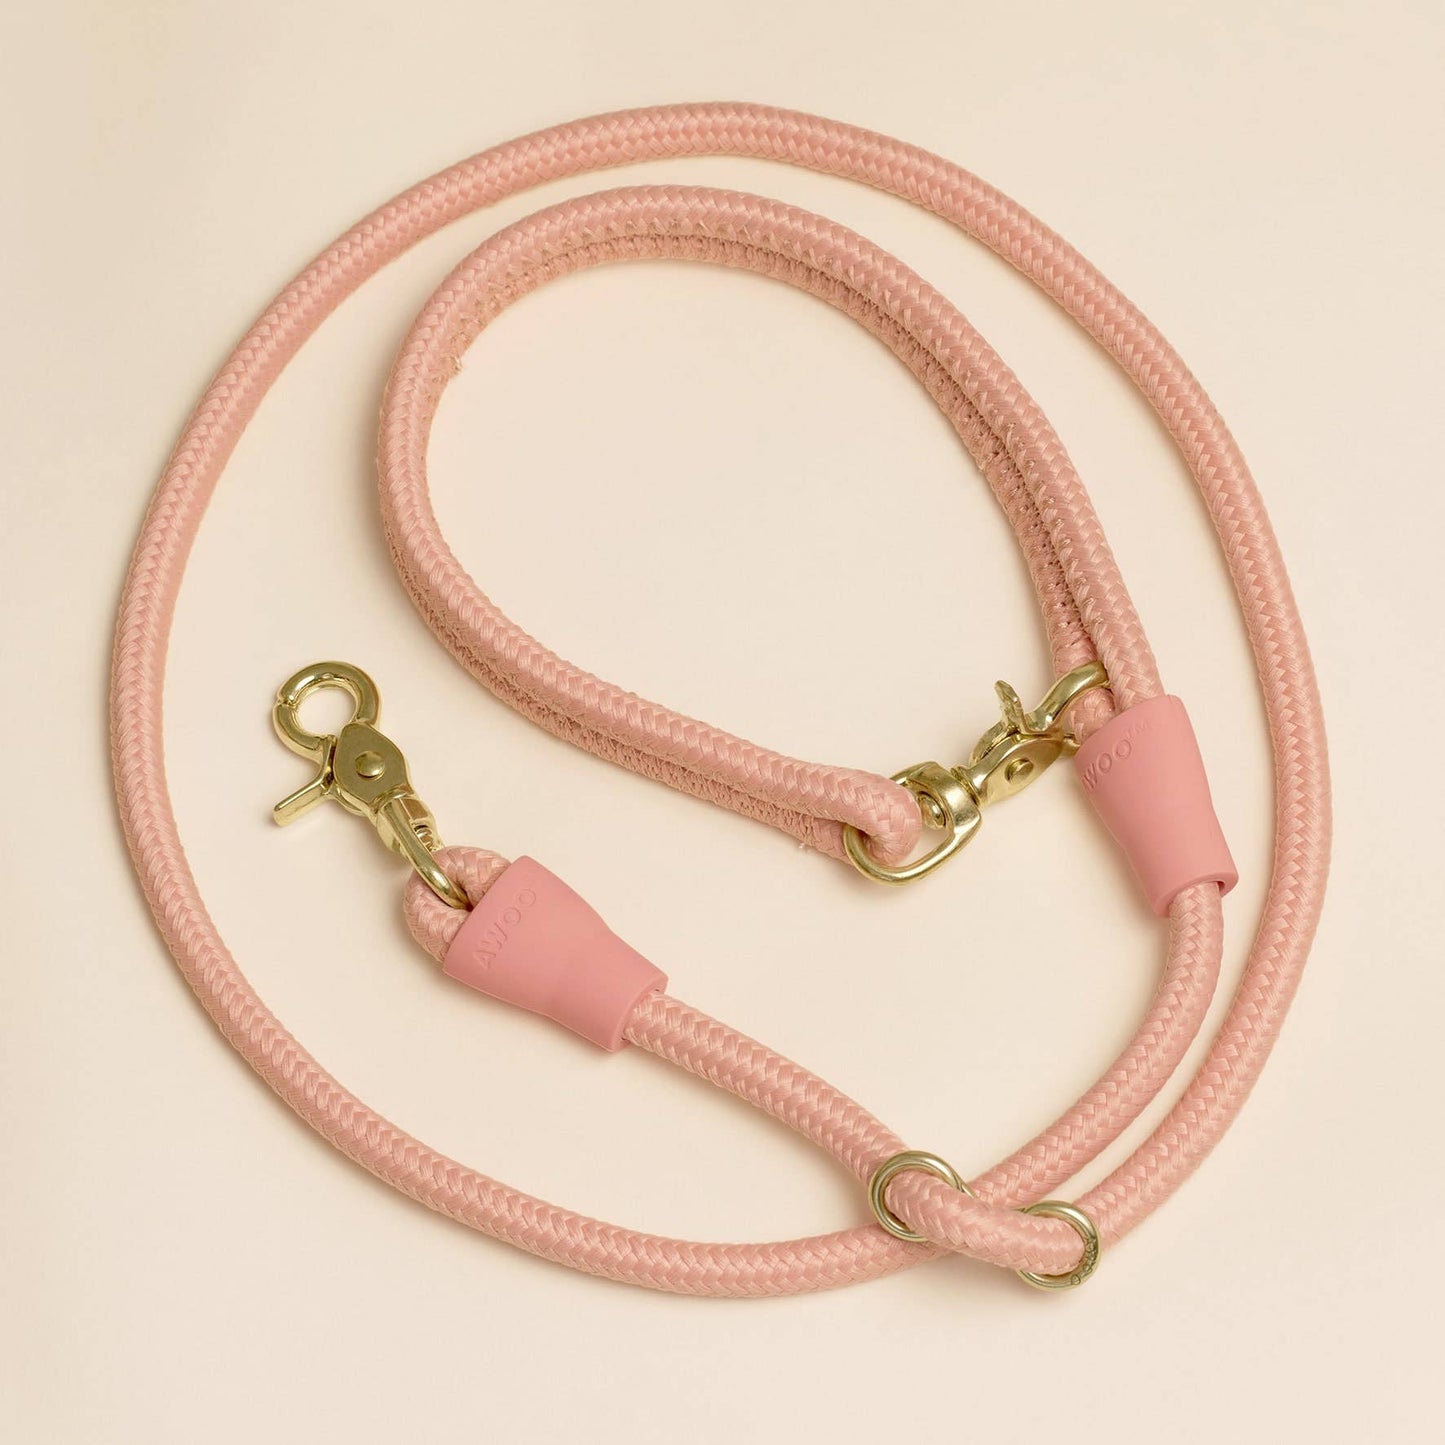 City Leash I Adjustable, 5-in-1 Multiway, Rope Dog Leash - Peach